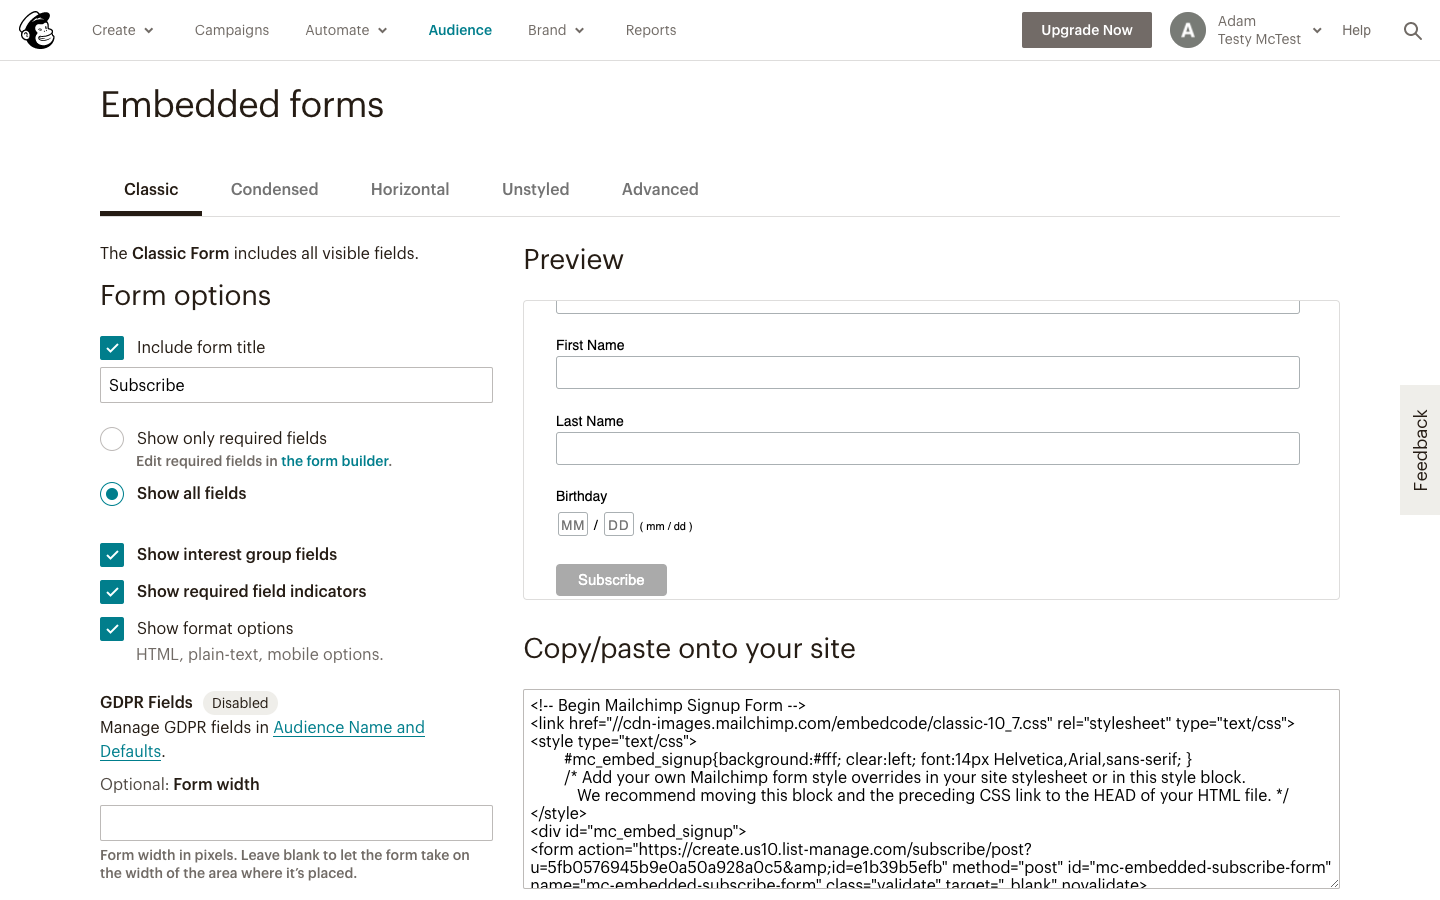 How To Add A Mailchimp Signup Form To Your Website